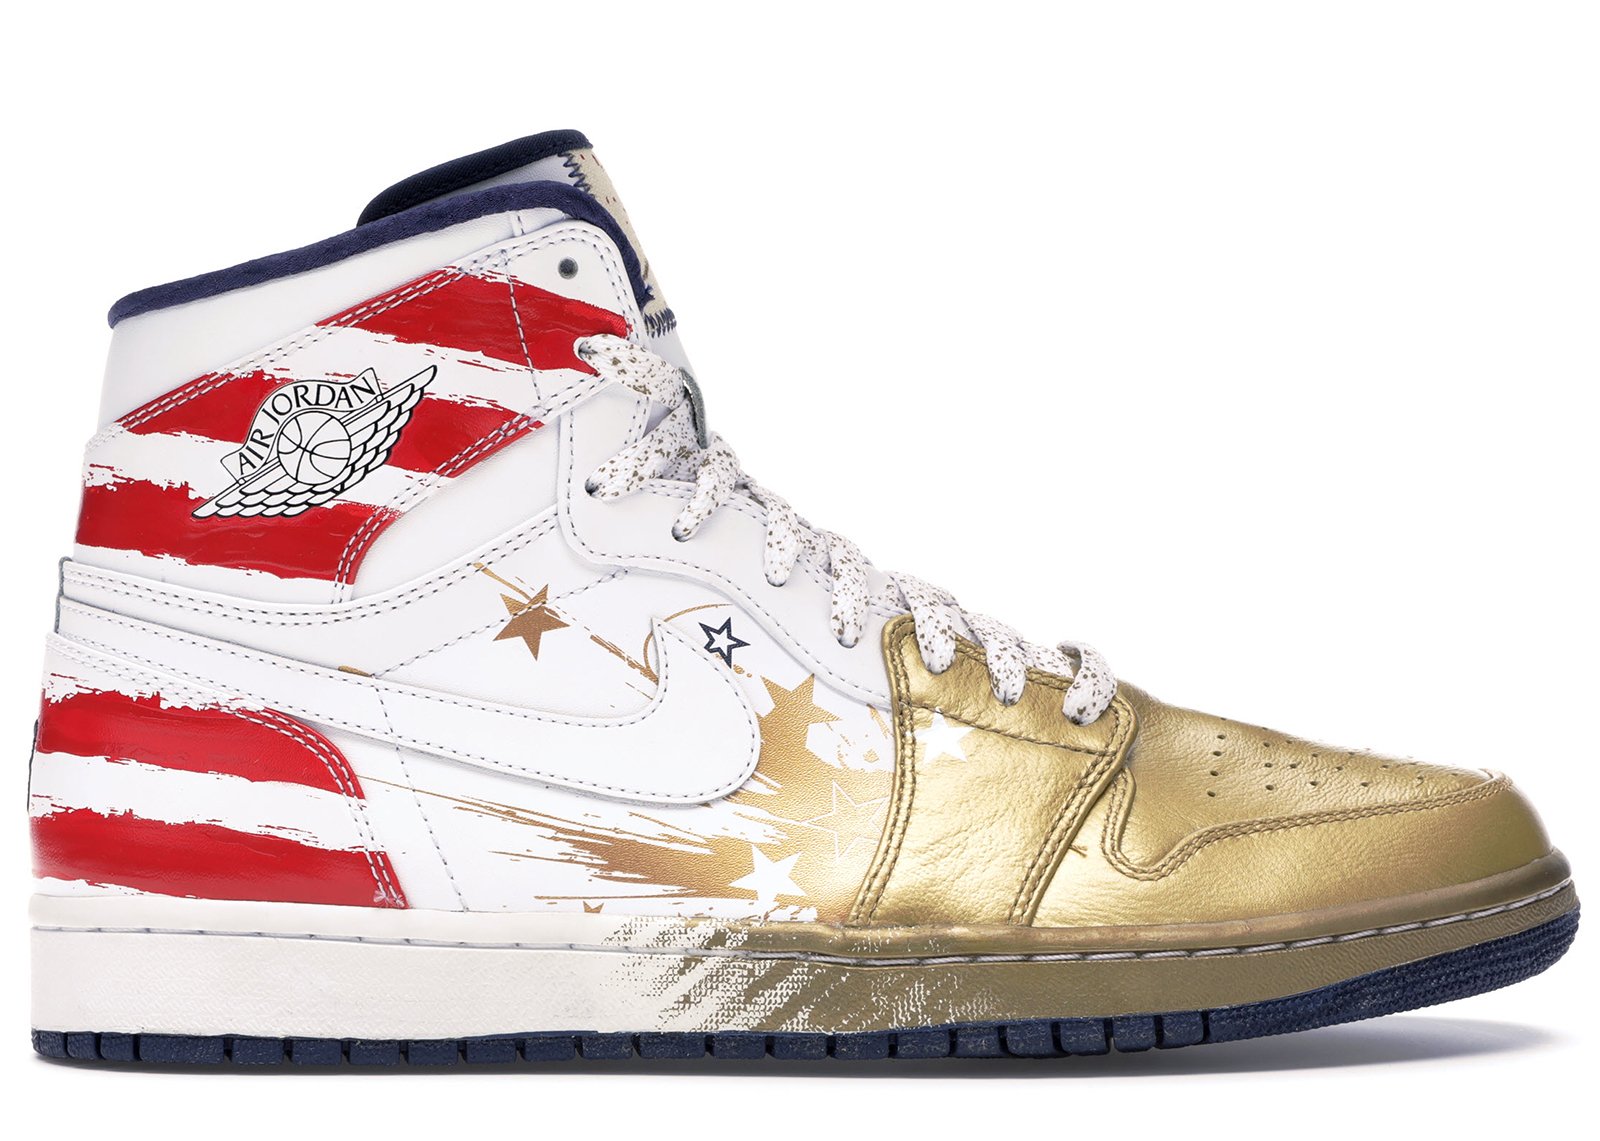 Jordan 1 Retro Dave White Wings For the Future Gold sneakers